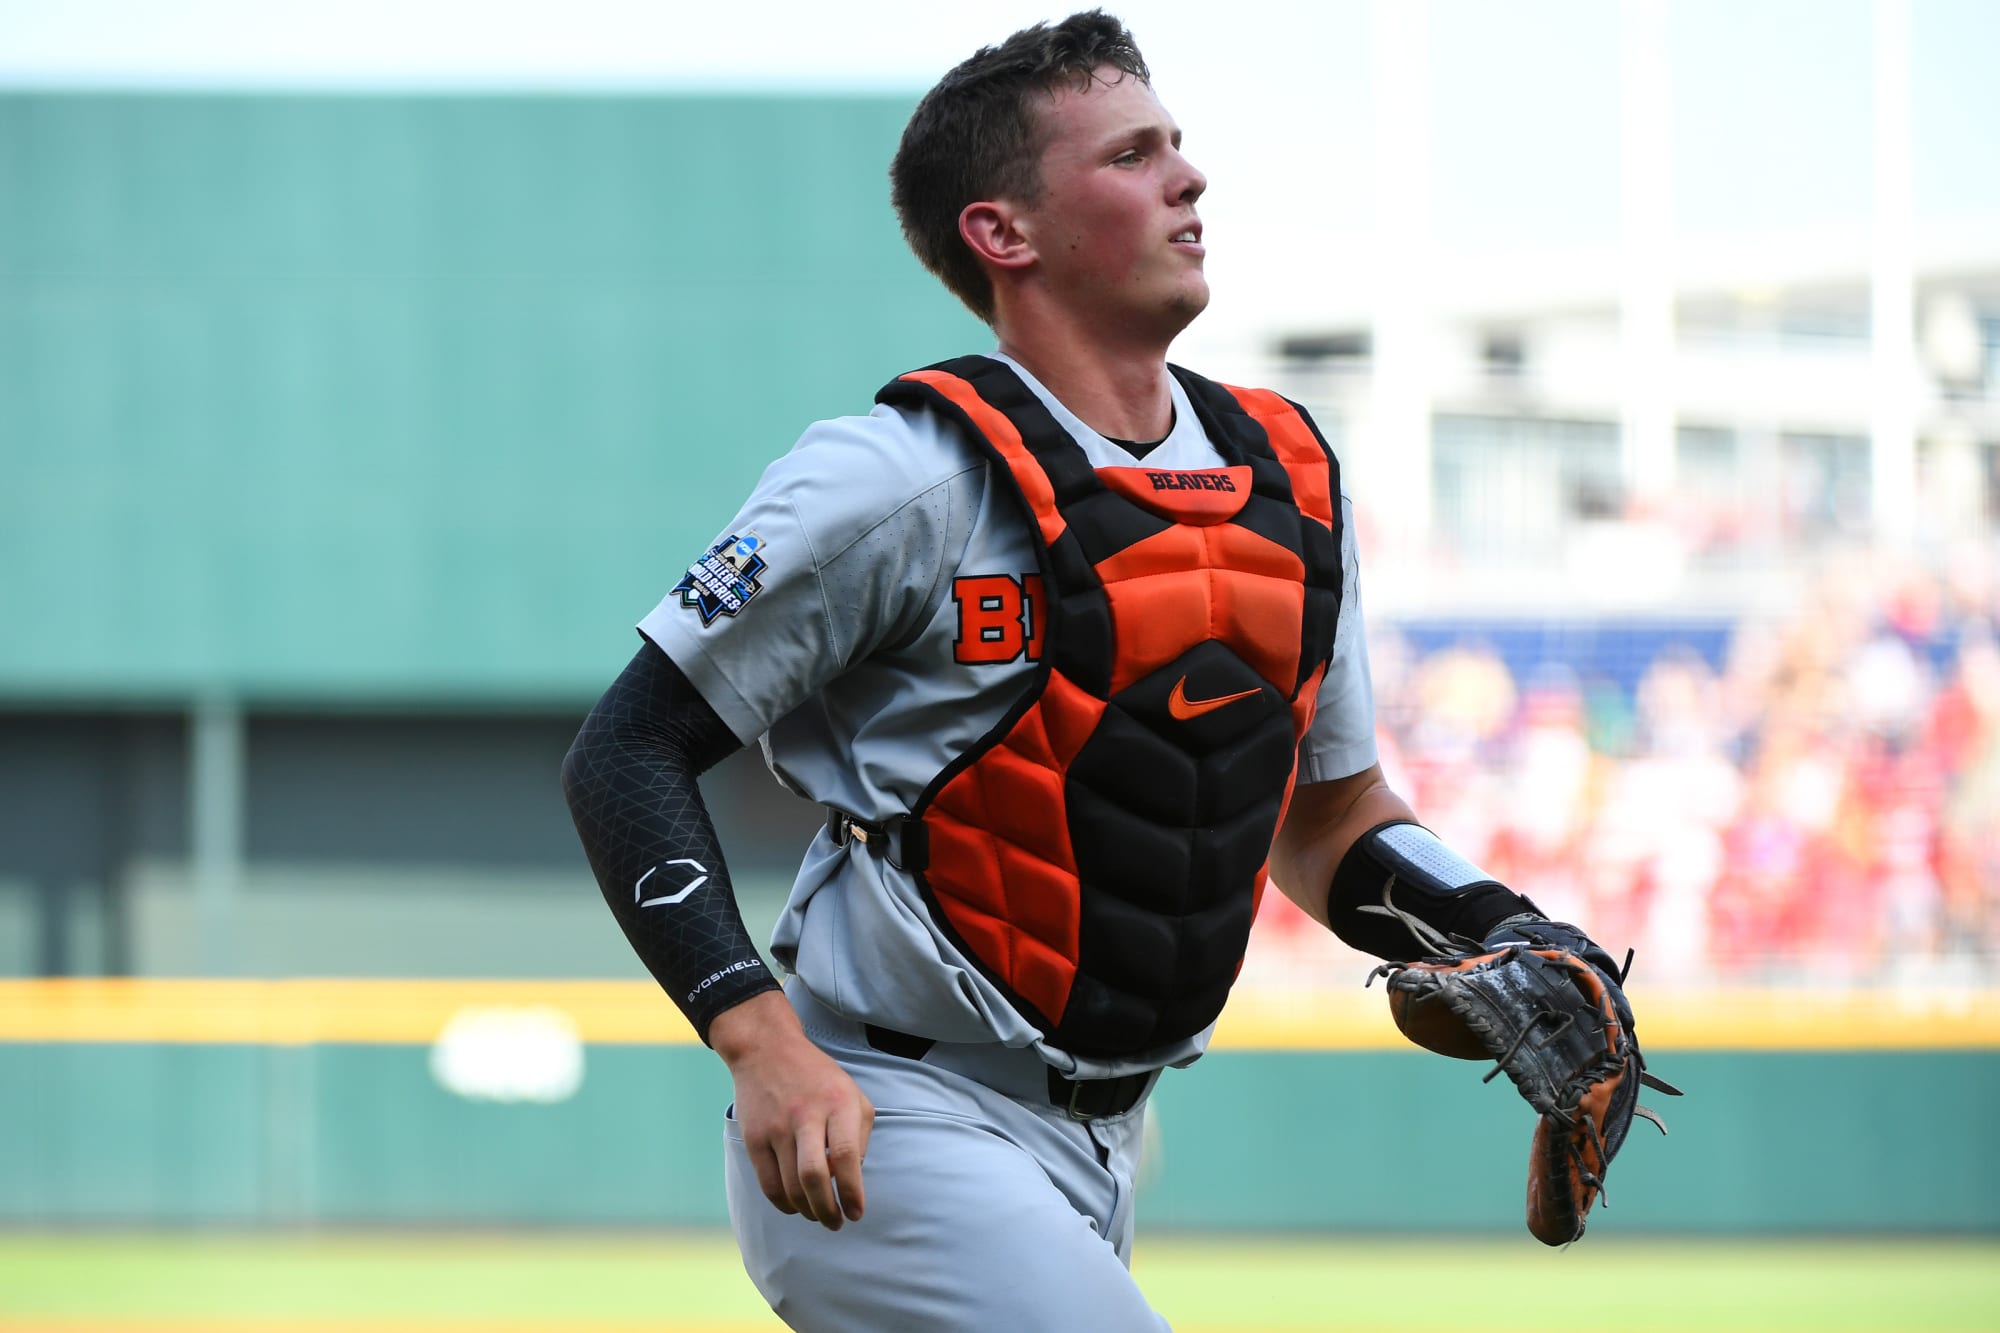 MLB Draft news Orioles can't afford to pass on Adley Rutschman